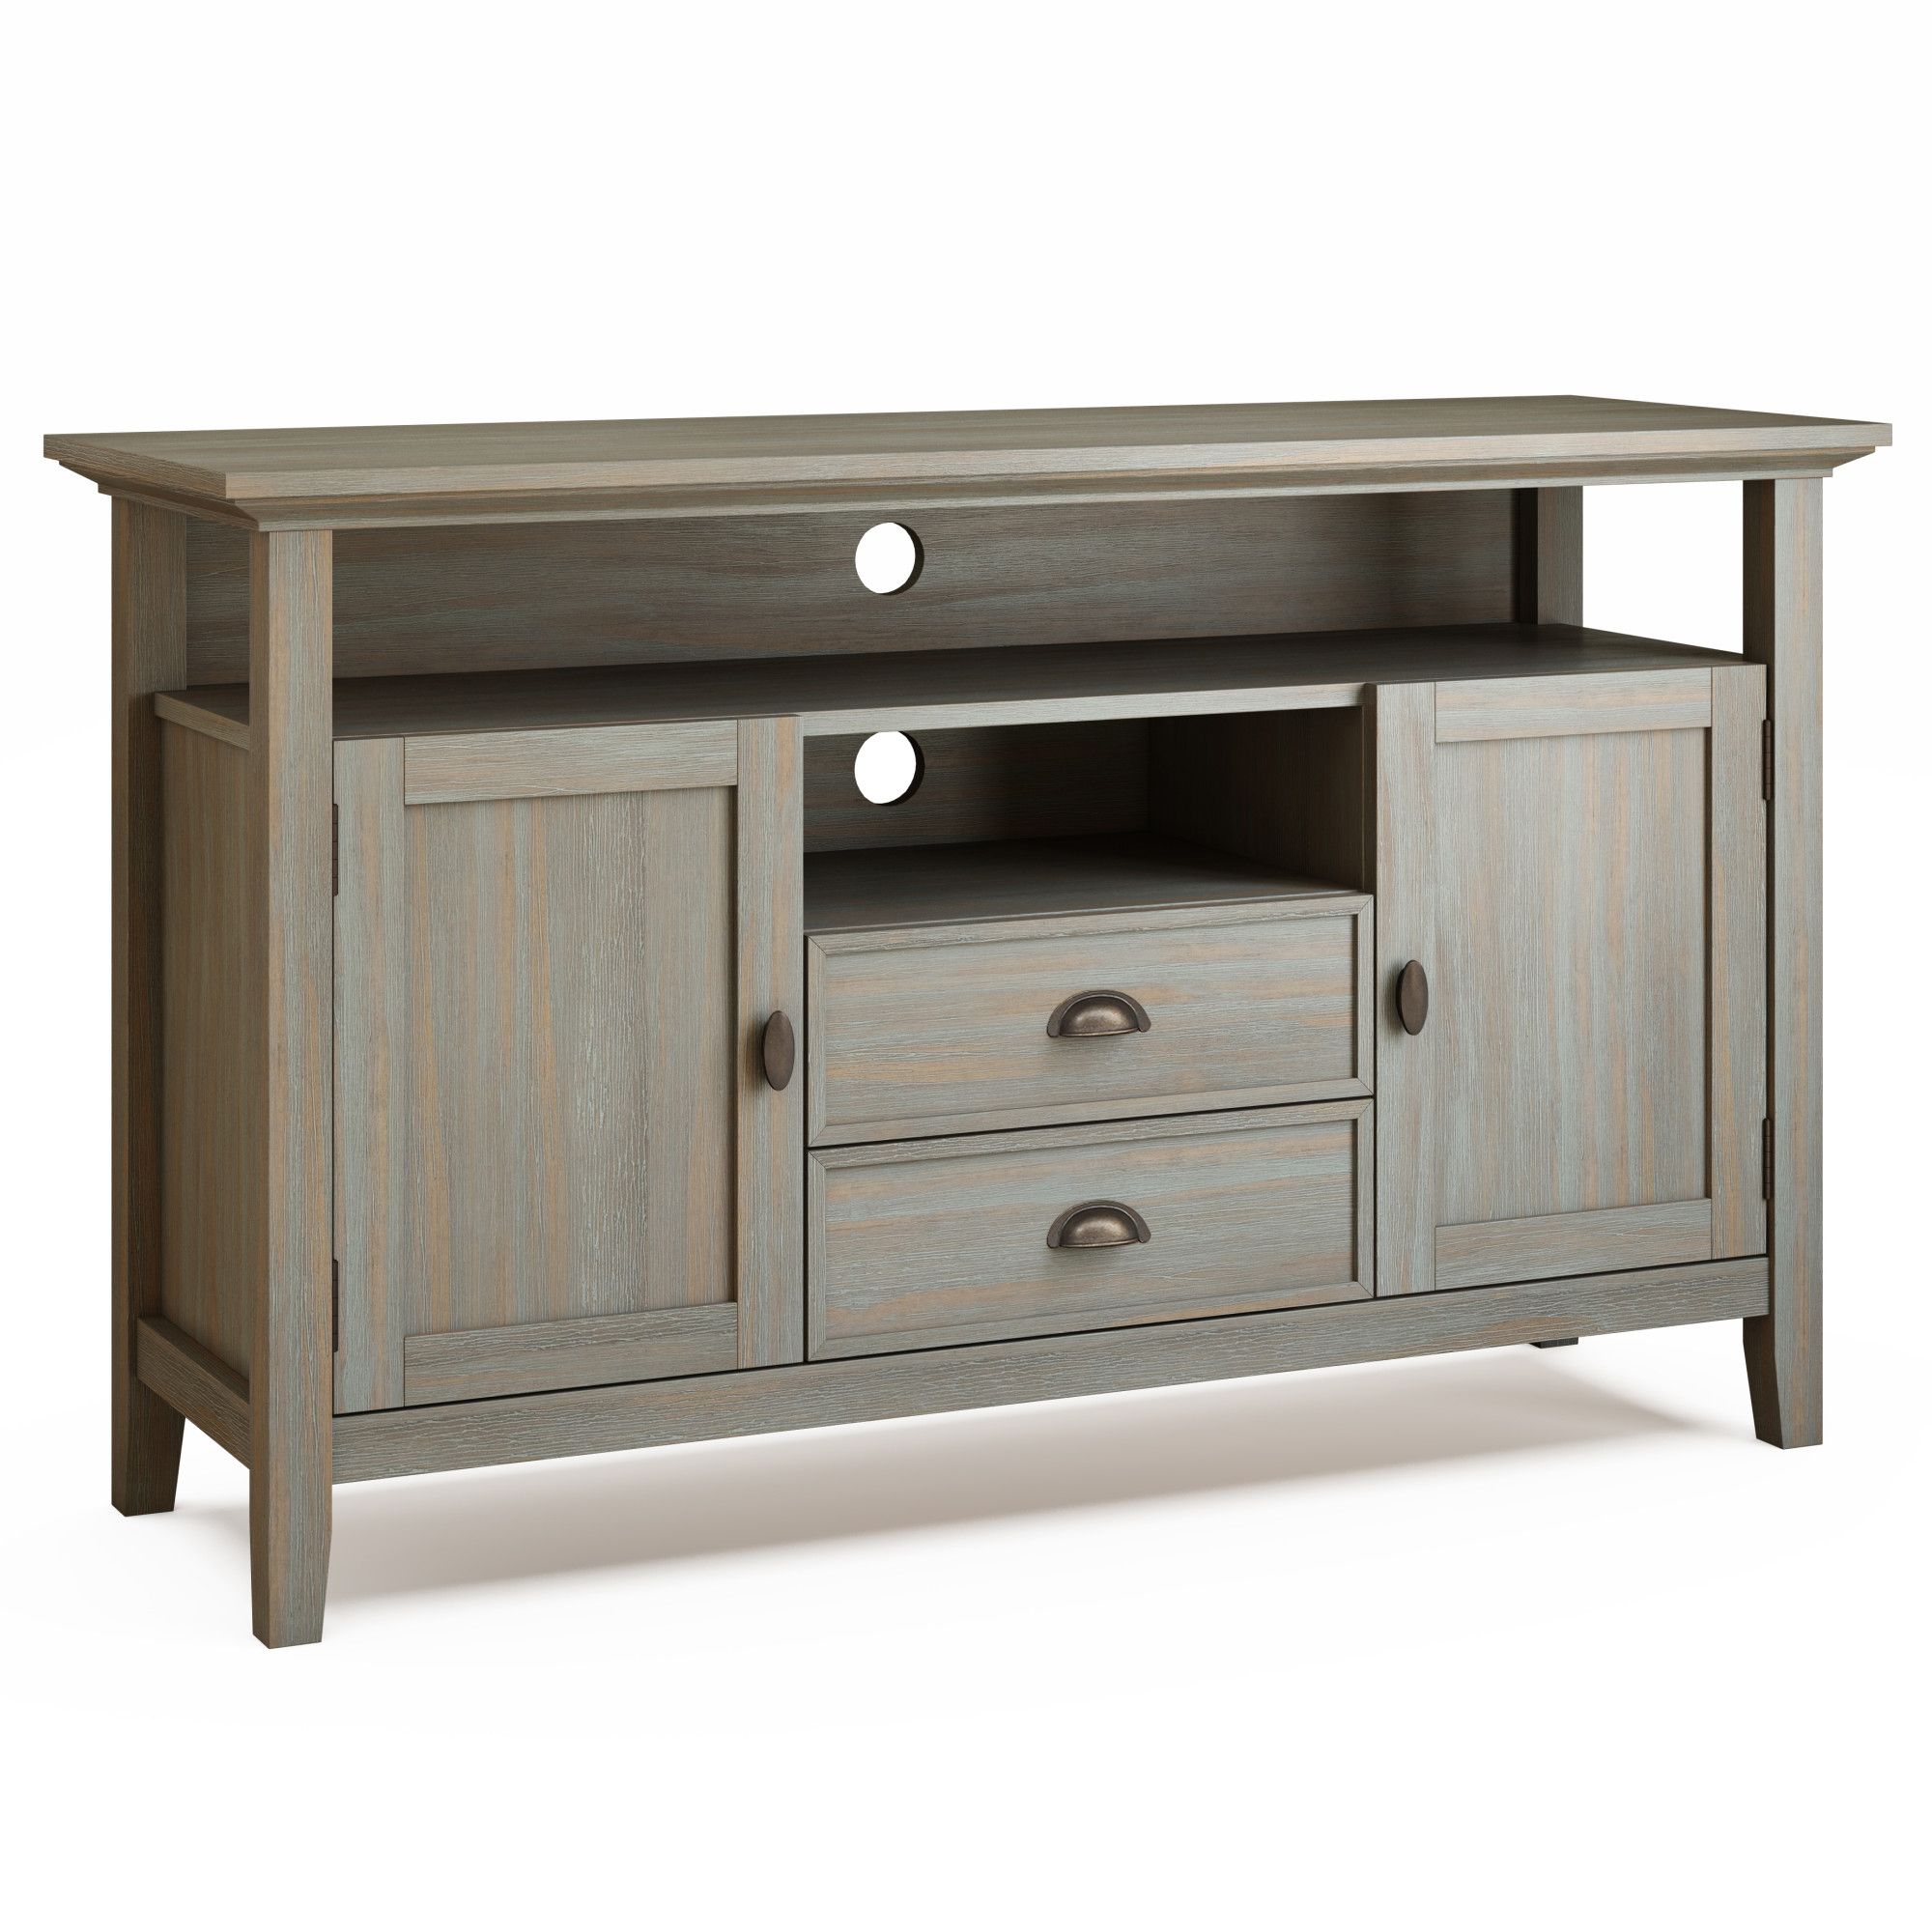 Brooklyn + Max Stanwick Solid Wood 54 Inch Wide Rustic Tv Within Harbor Wide Tv Stands (View 4 of 20)